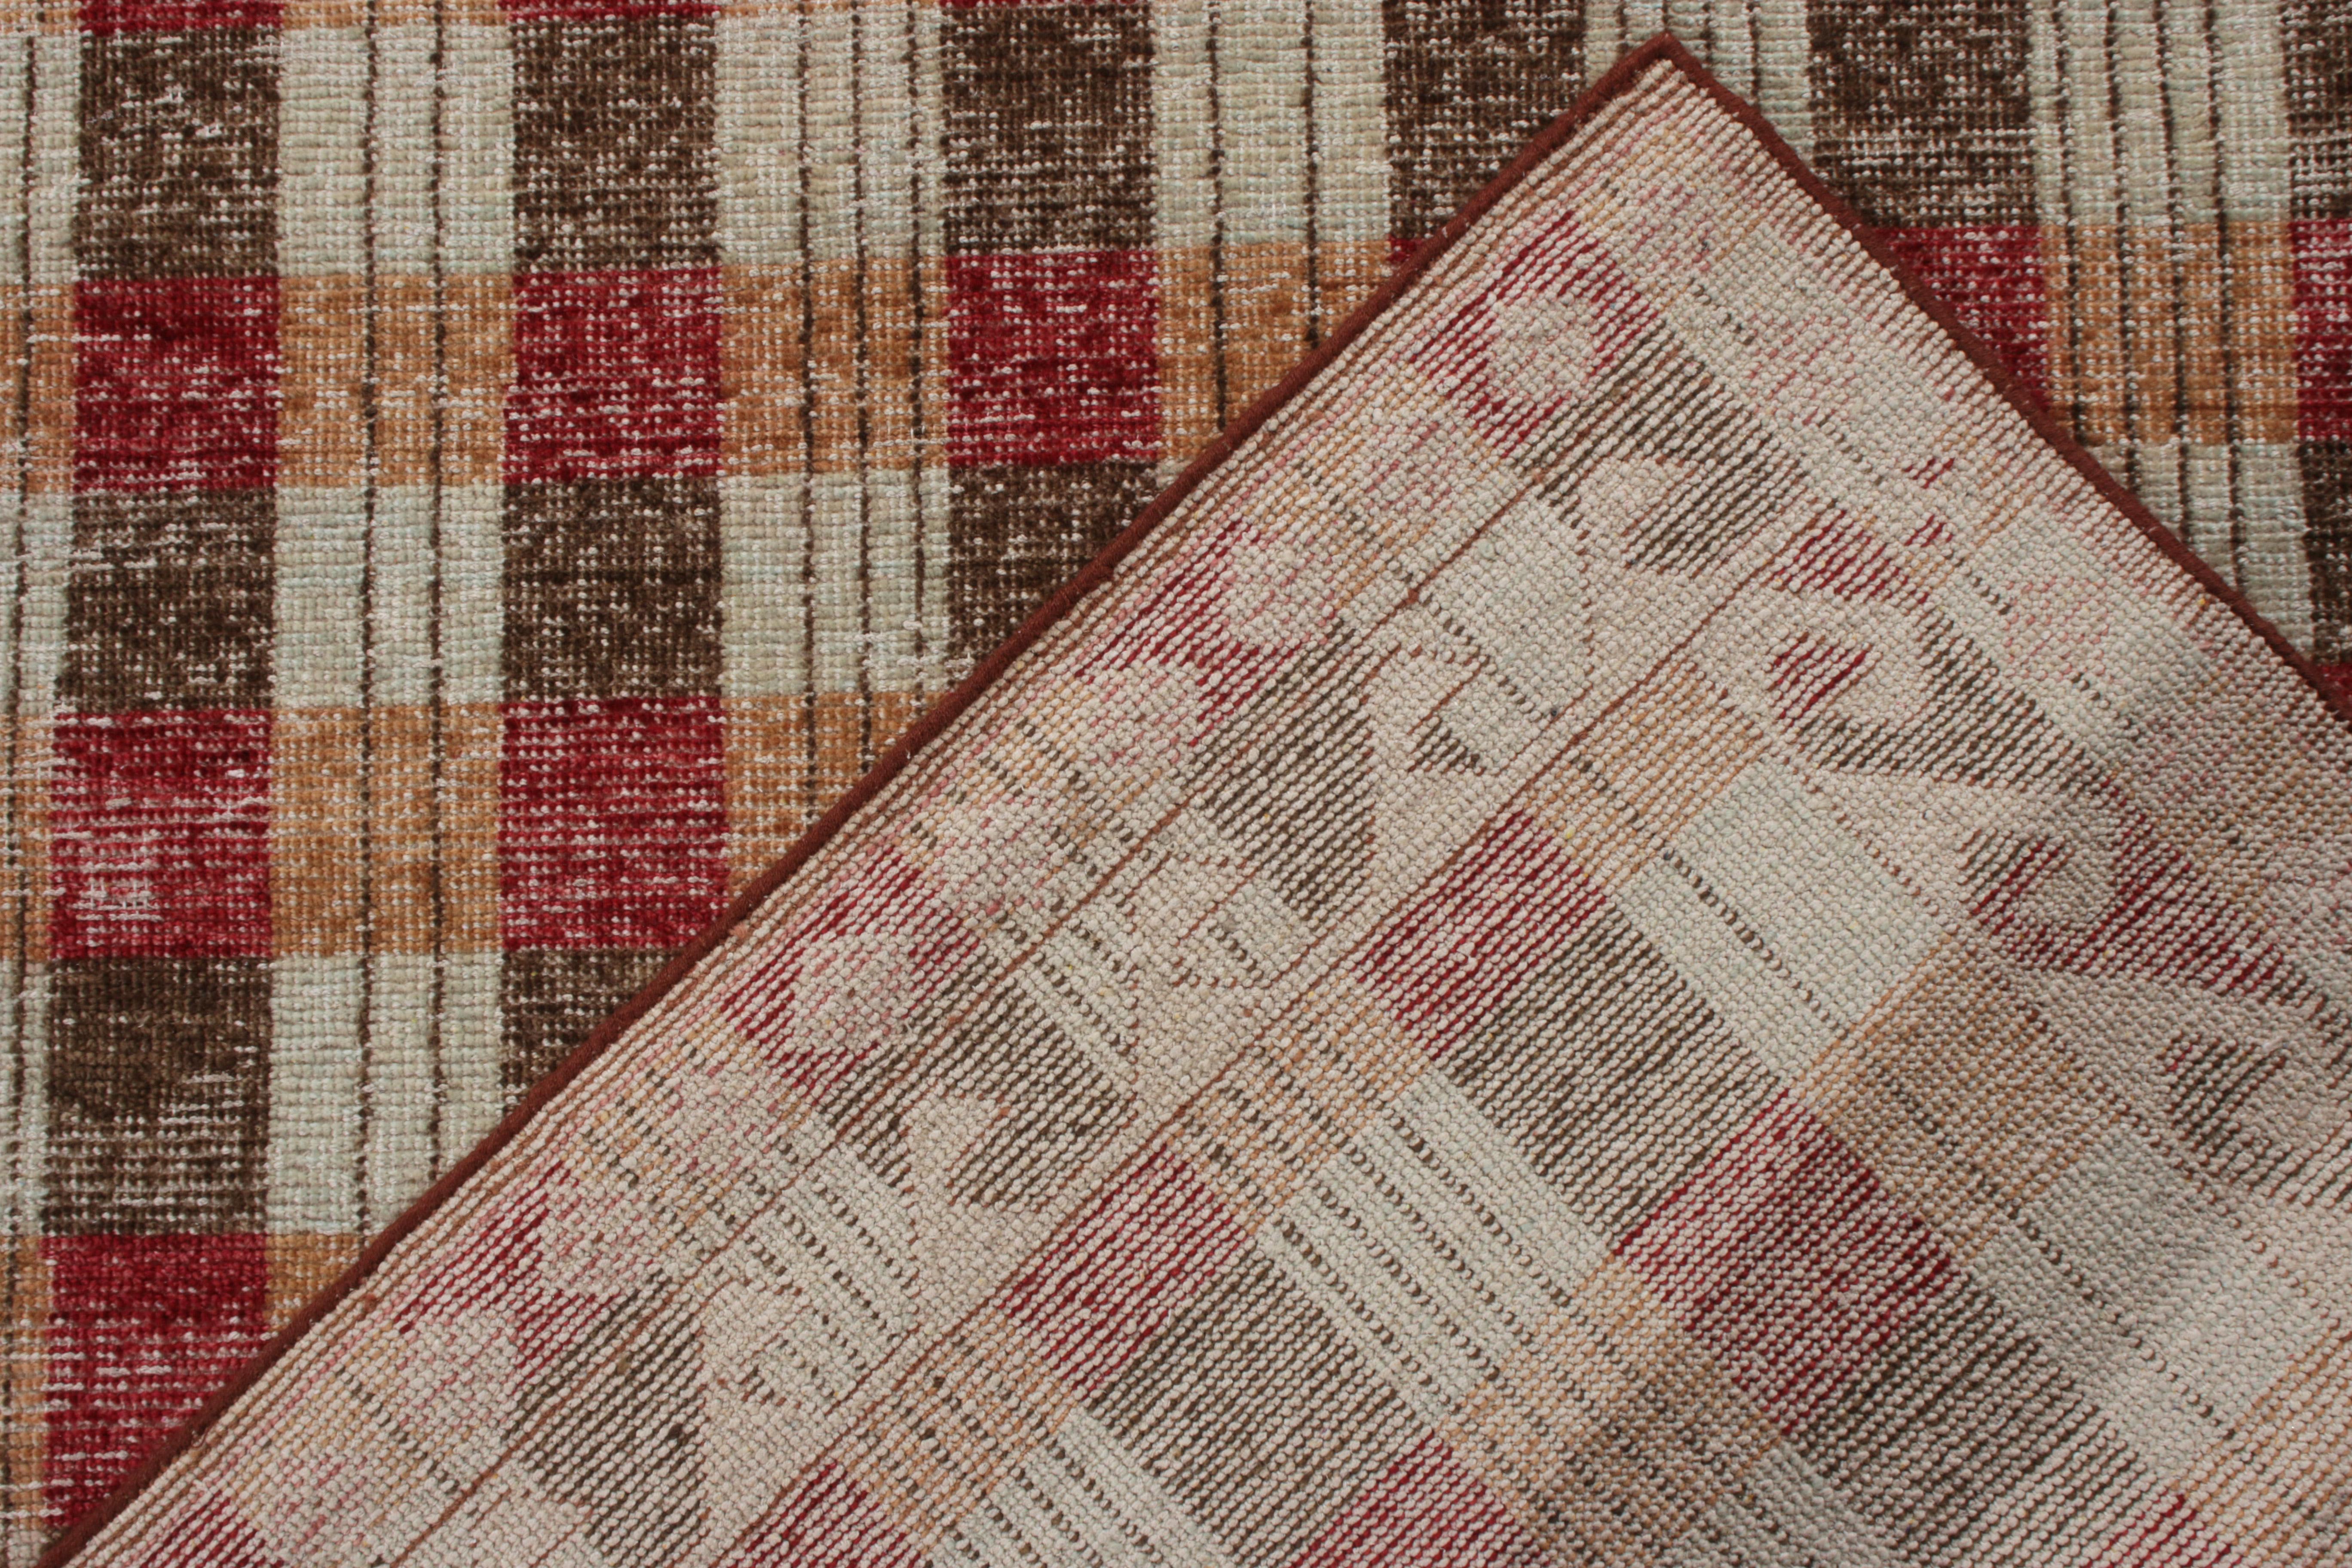 Hand-Knotted Rug & Kilim’s Distressed Classic Style Rug in Beige-Brown, Red Geometric Pattern For Sale